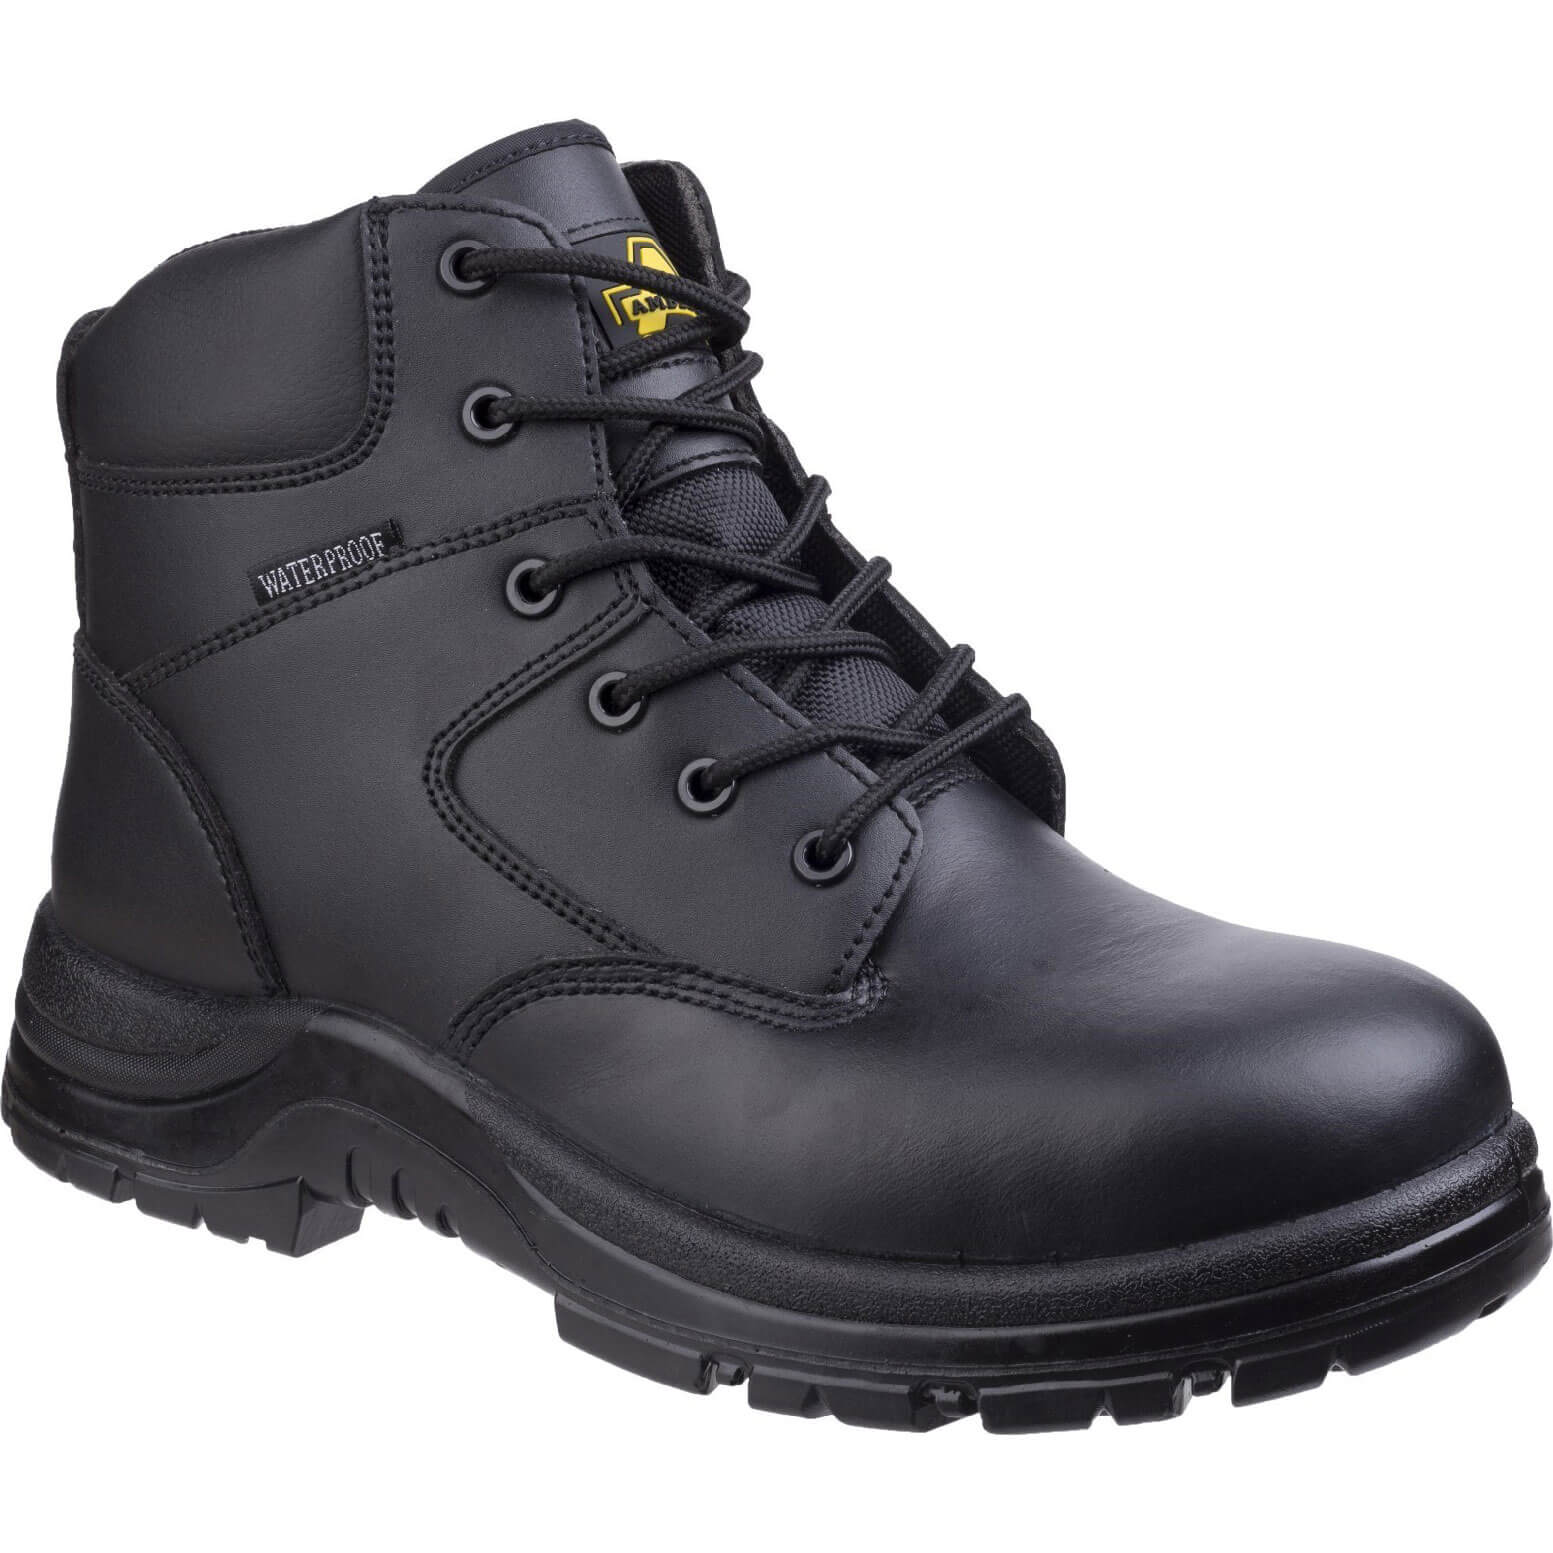 Image of Amblers Safety FS006C Metal Free Waterproof Safety Boots Black Size 10